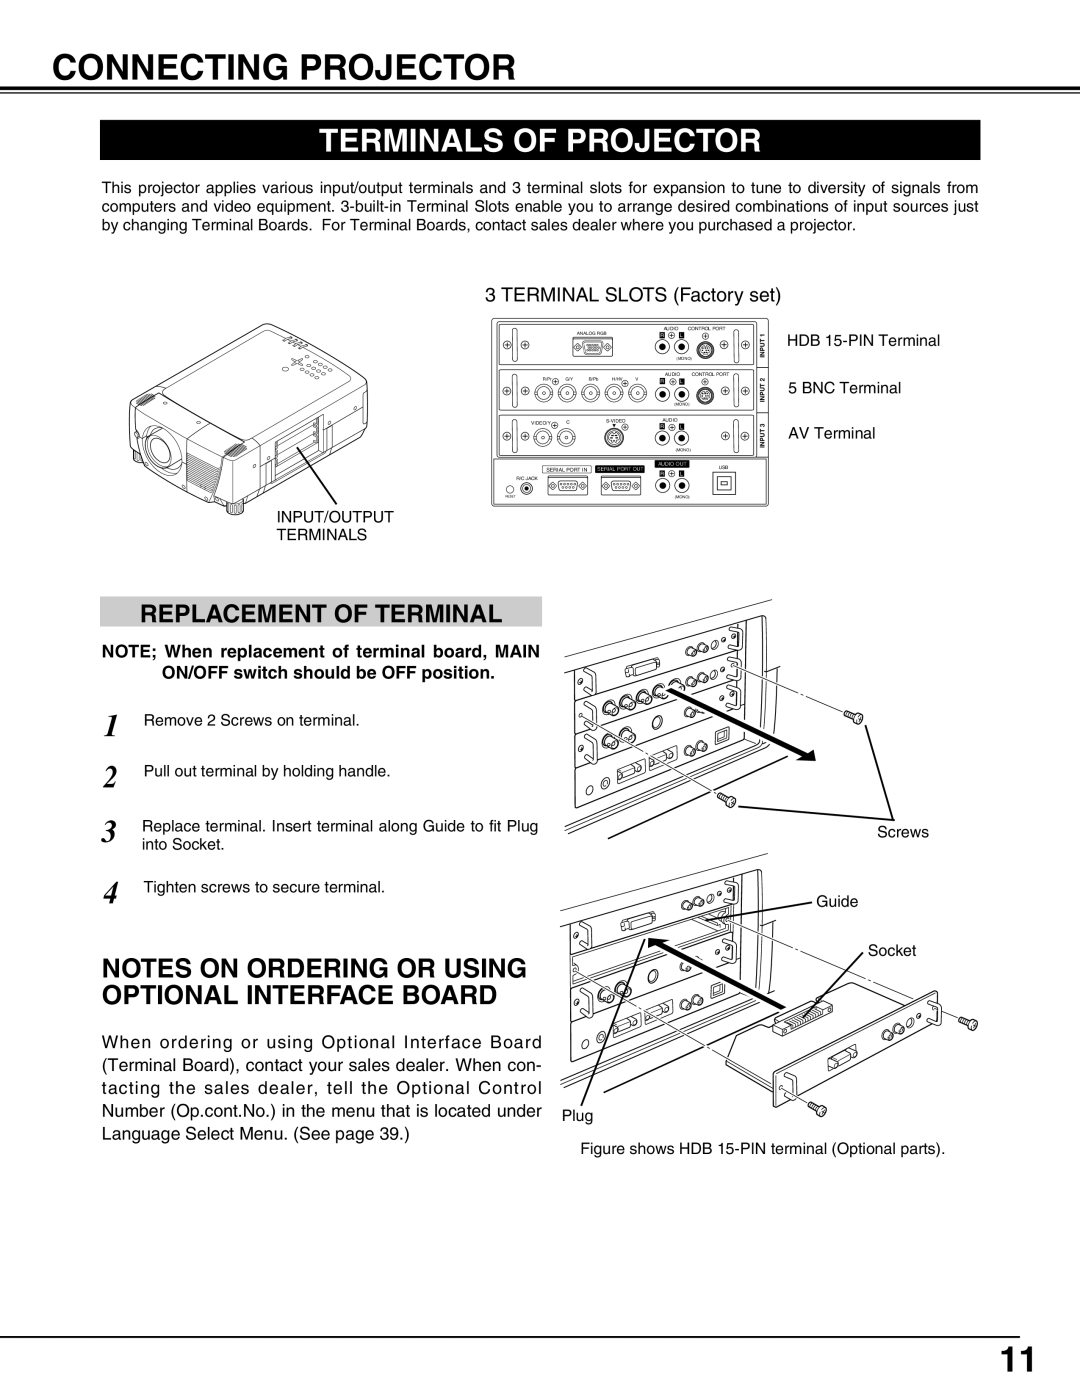 Christie Digital Systems 38-VIV302-01 user manual Connecting Projector, Terminals Of Projector, Replacement Of Terminal 